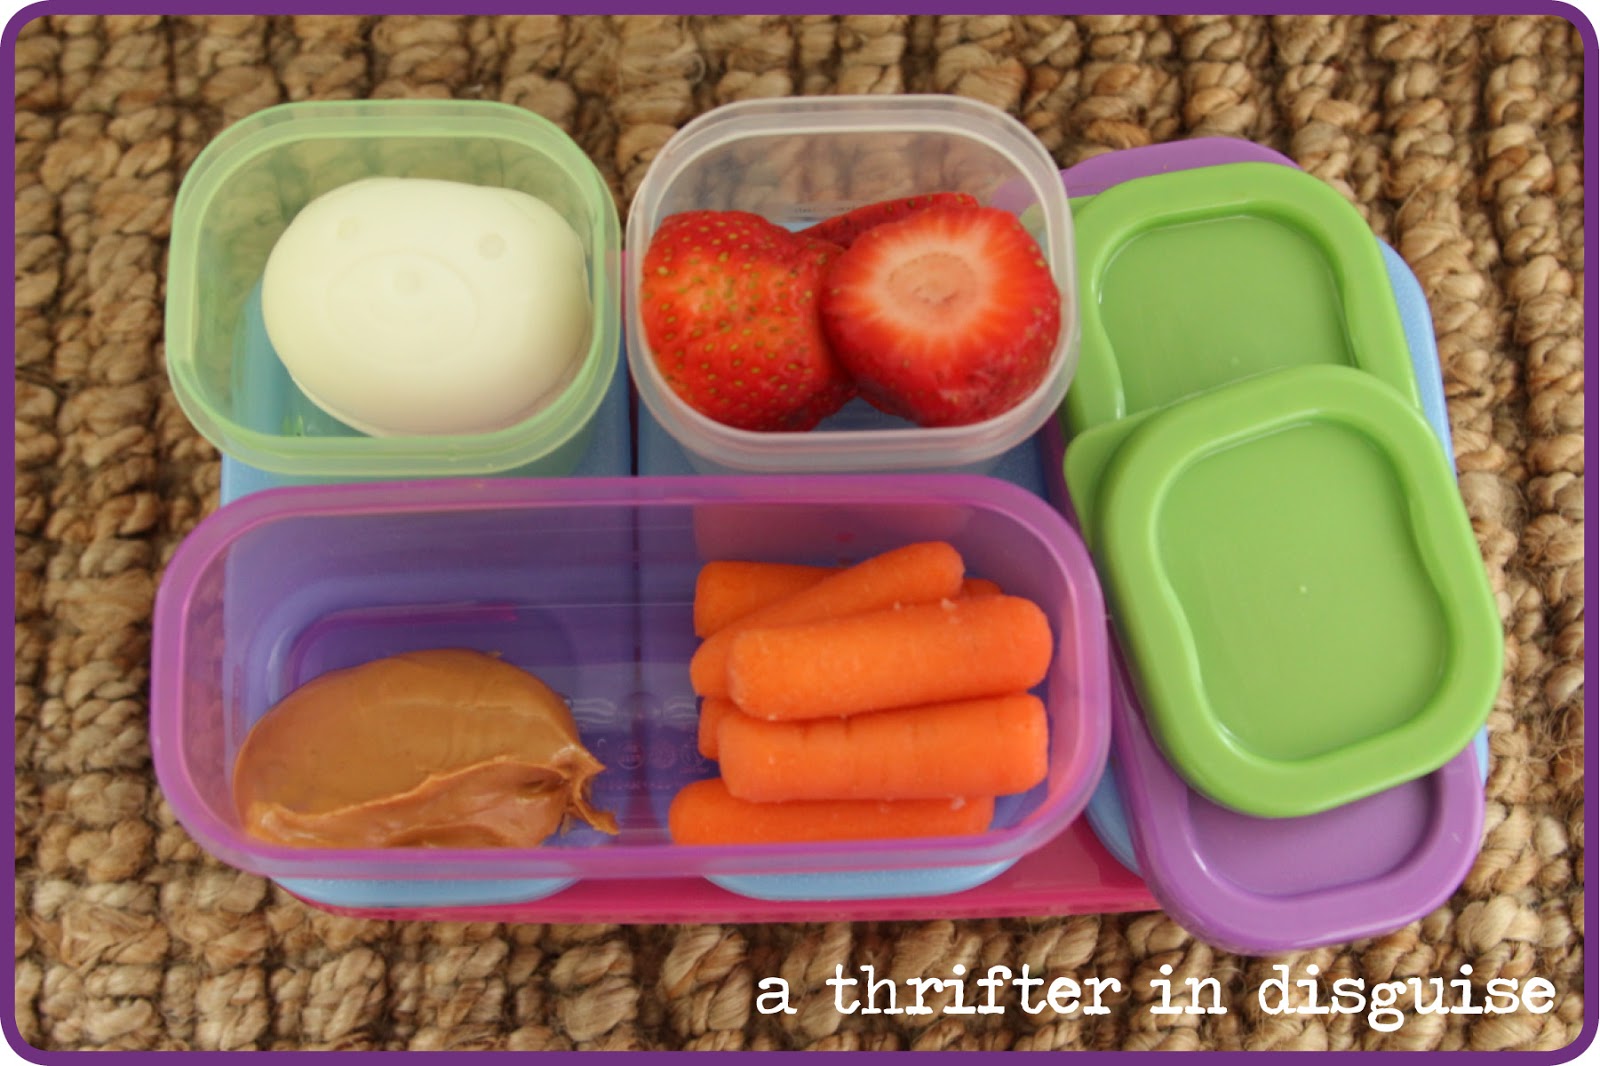 Instagram parents painstakingly pack Bento lunchbox for their children